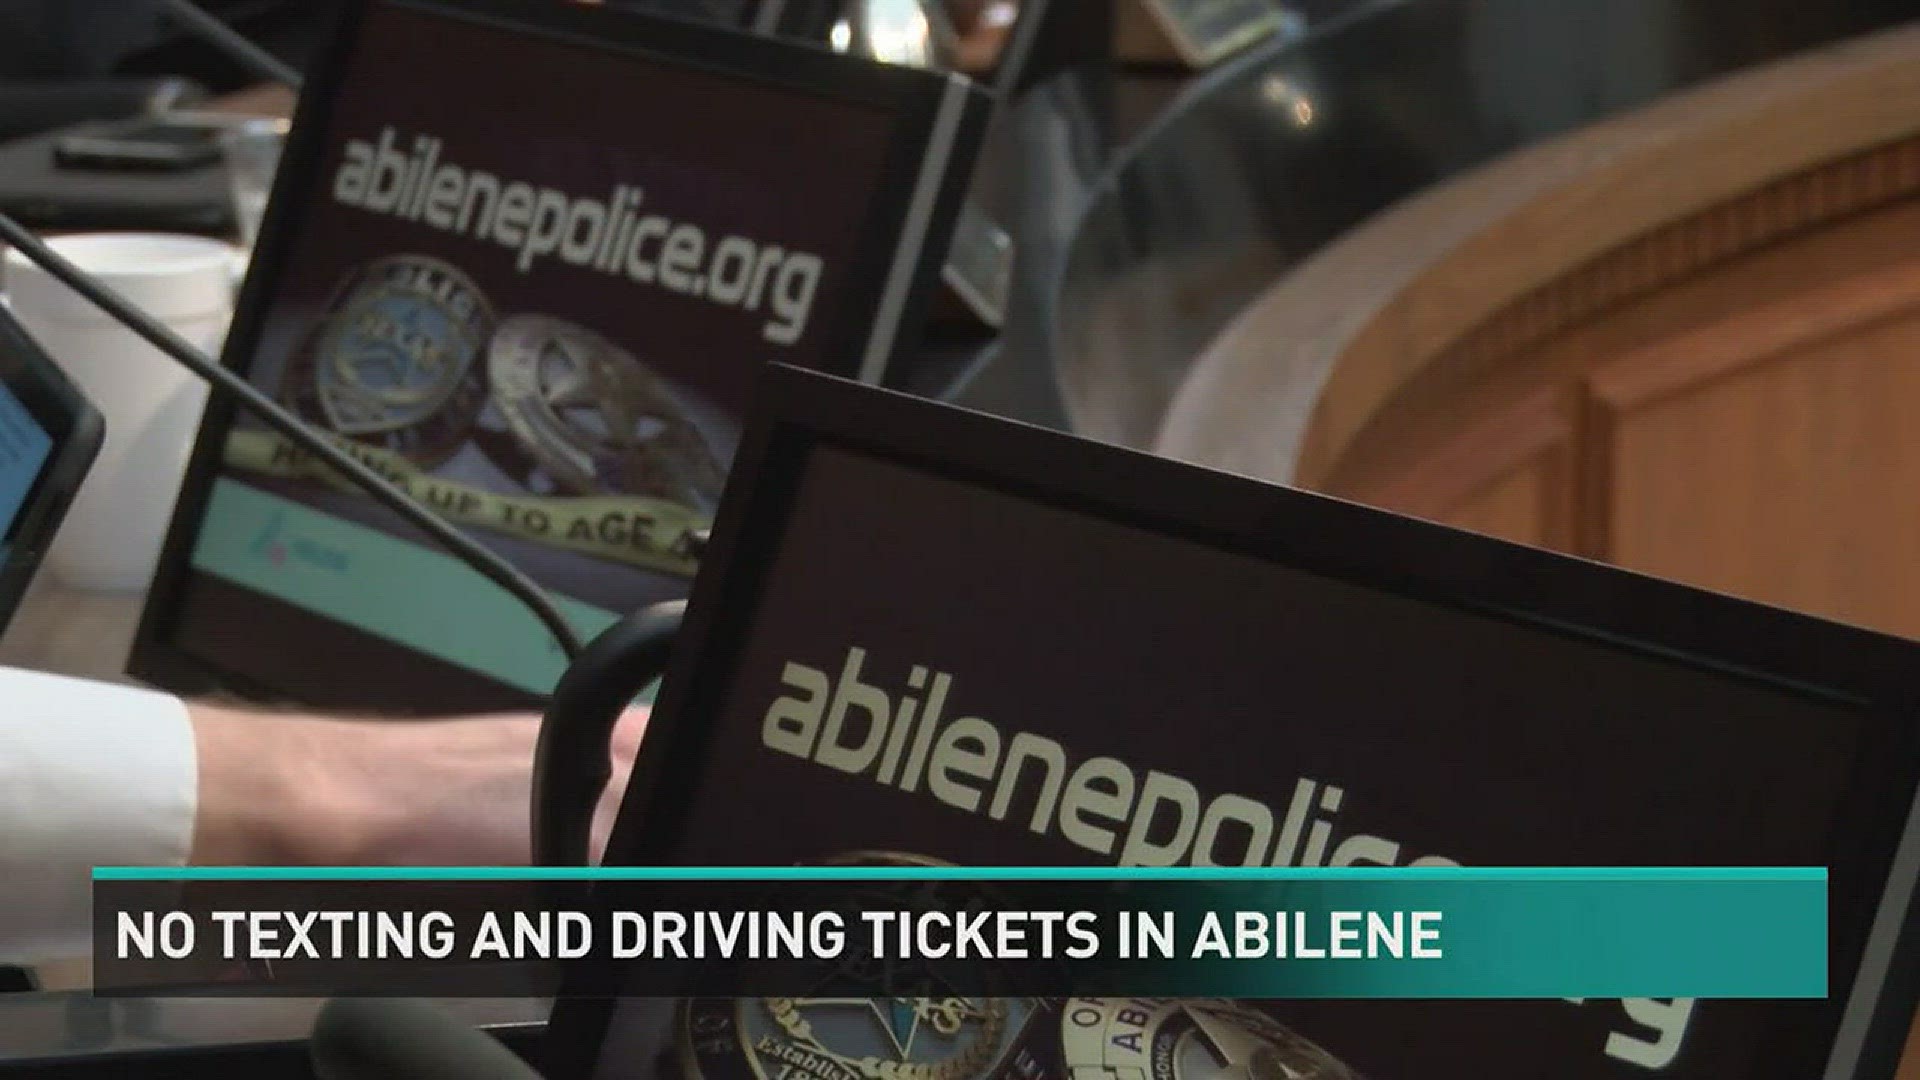 After the texting while driving ban went into effect Sept. 1, there has not been one ticket cited in Abilene, according to Abilene's Municipal Court. However, they did say there has been many violations for using a wireless device in school zones. They didn't have an exact number available.